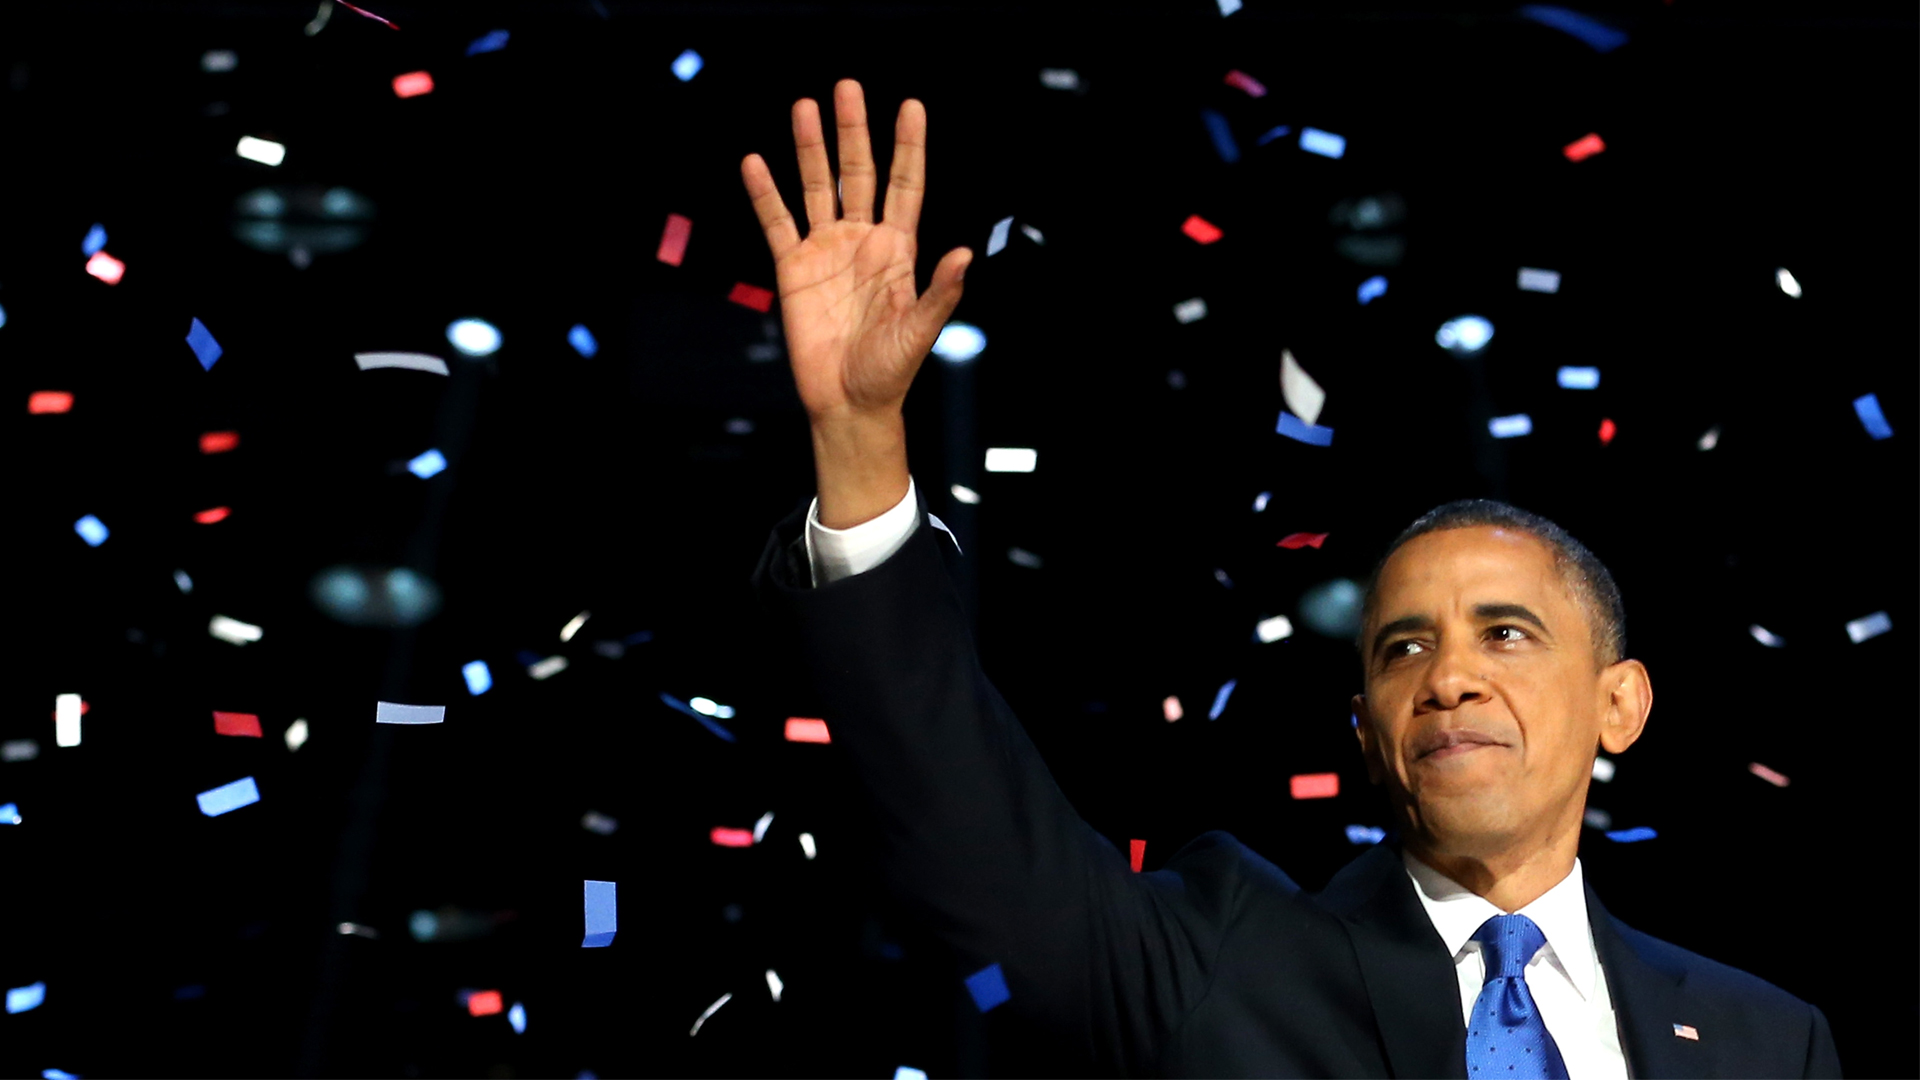 <p>Barack Obama becomes the first African-American president of the US. His direct African descent, as the son of a Kenyan economist, raises hopes for a fresh American approach to Africa.</p>